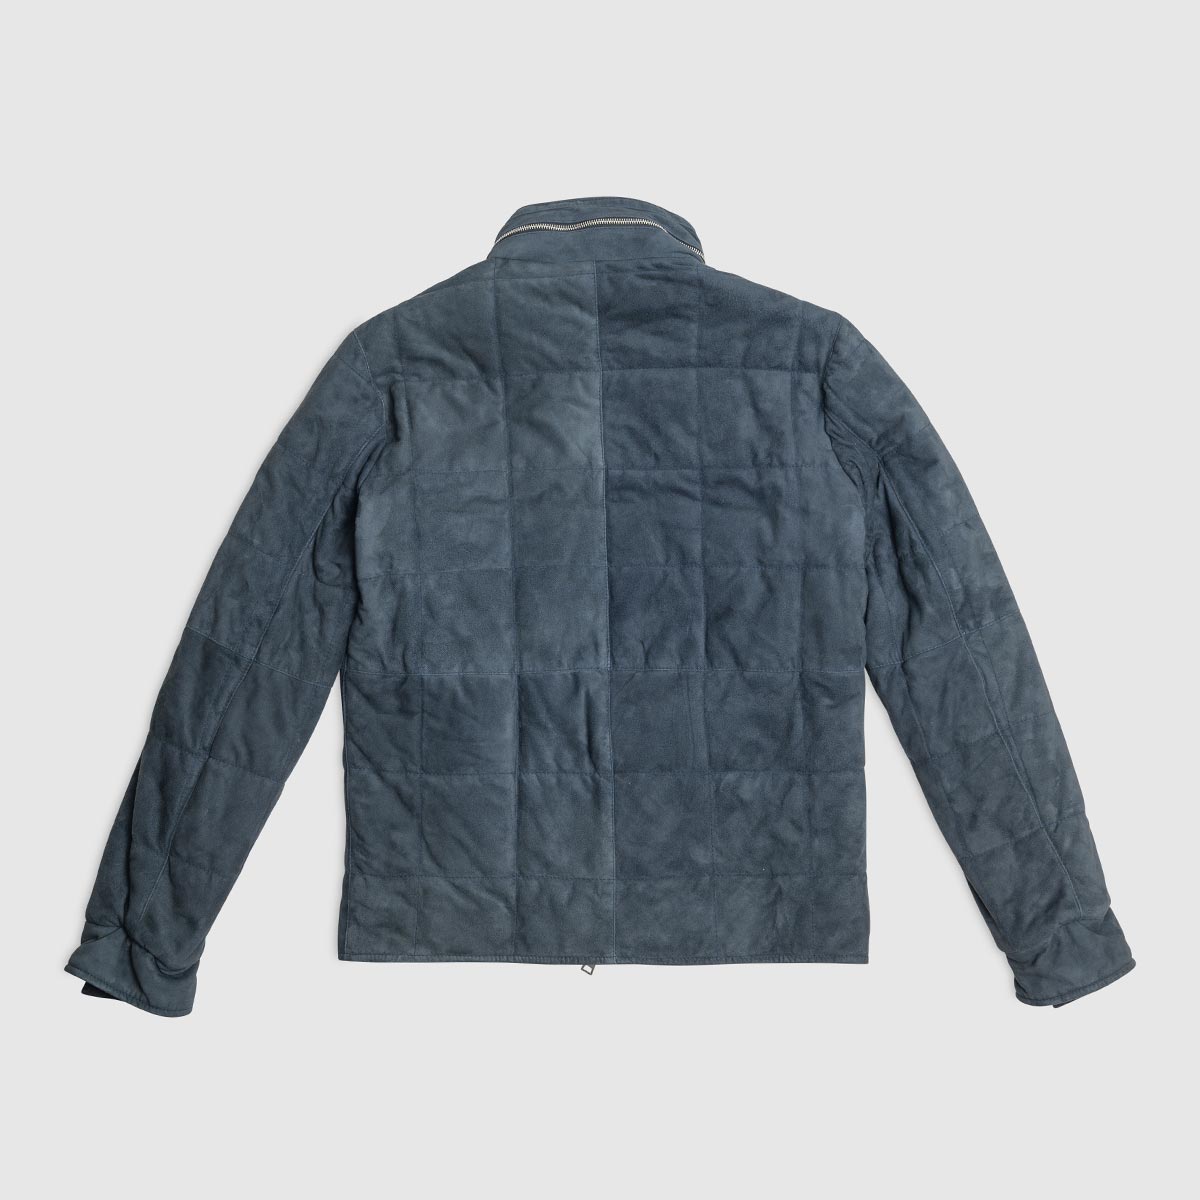 Blue Suede Bomber Jacket With Loro Piana Thermal Lining G. Inglese on sale 2022 2